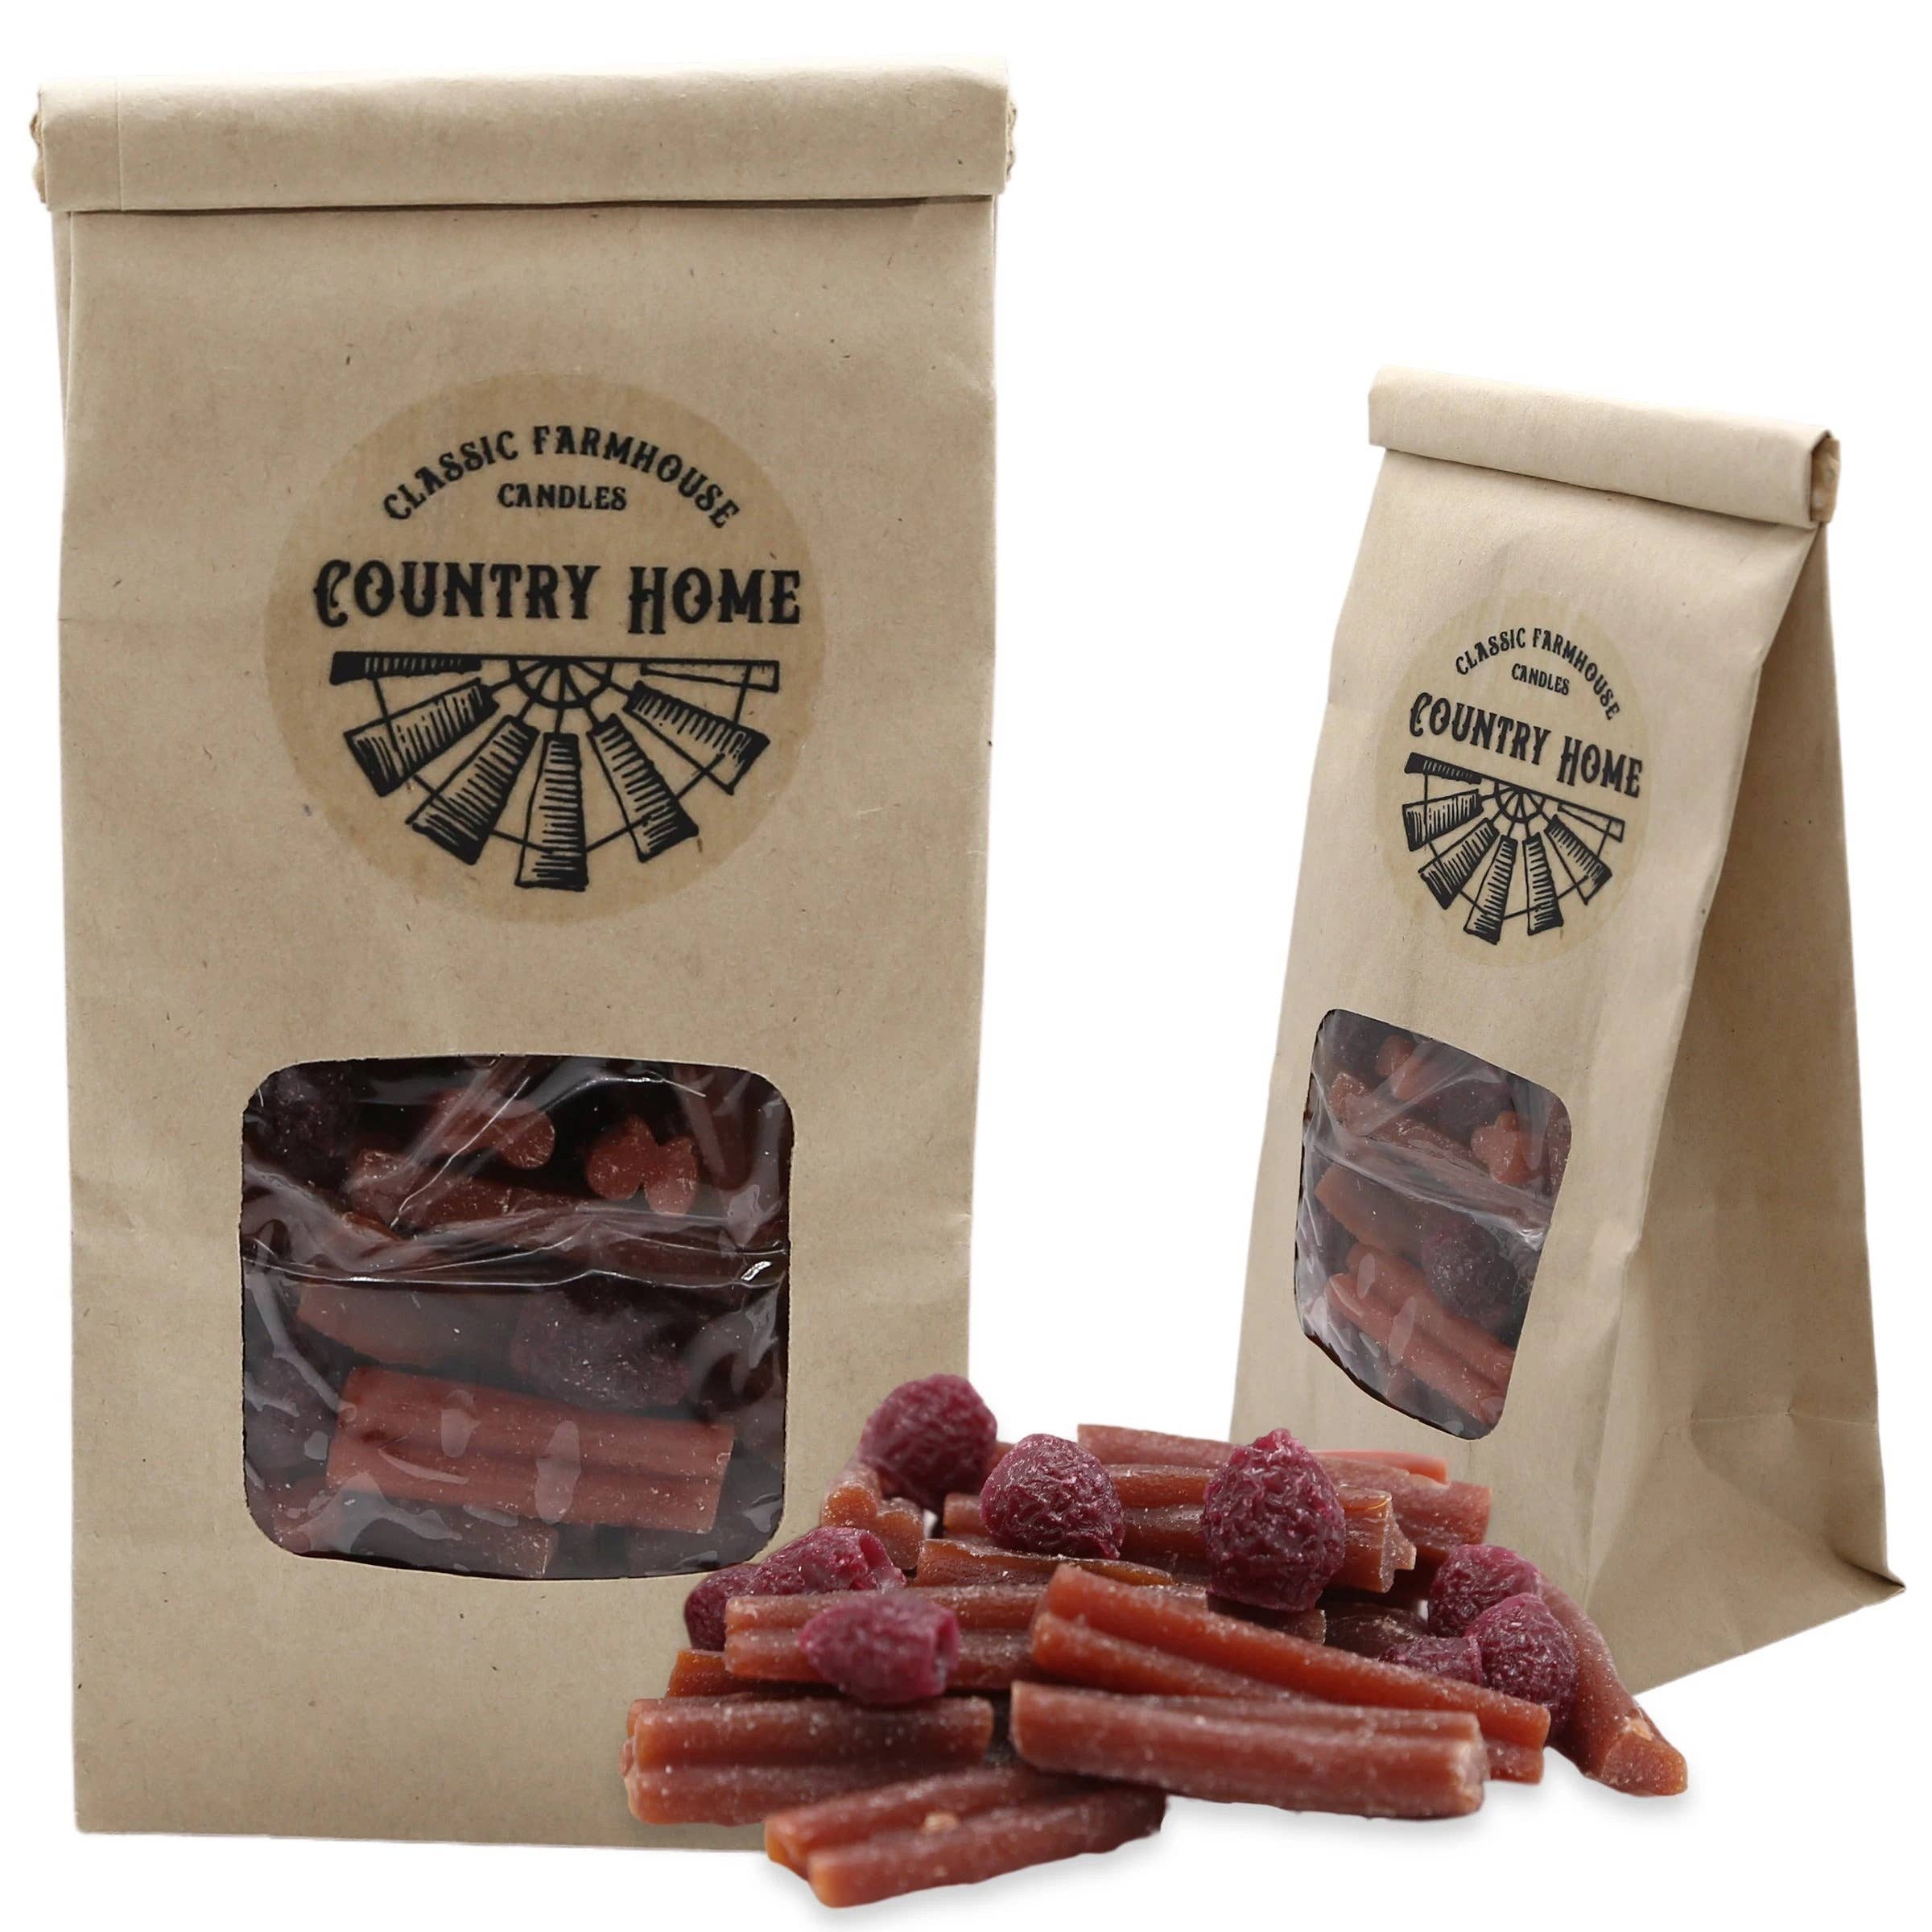 COUNTRY HOME Snacks - Classic Farmhouse Candle